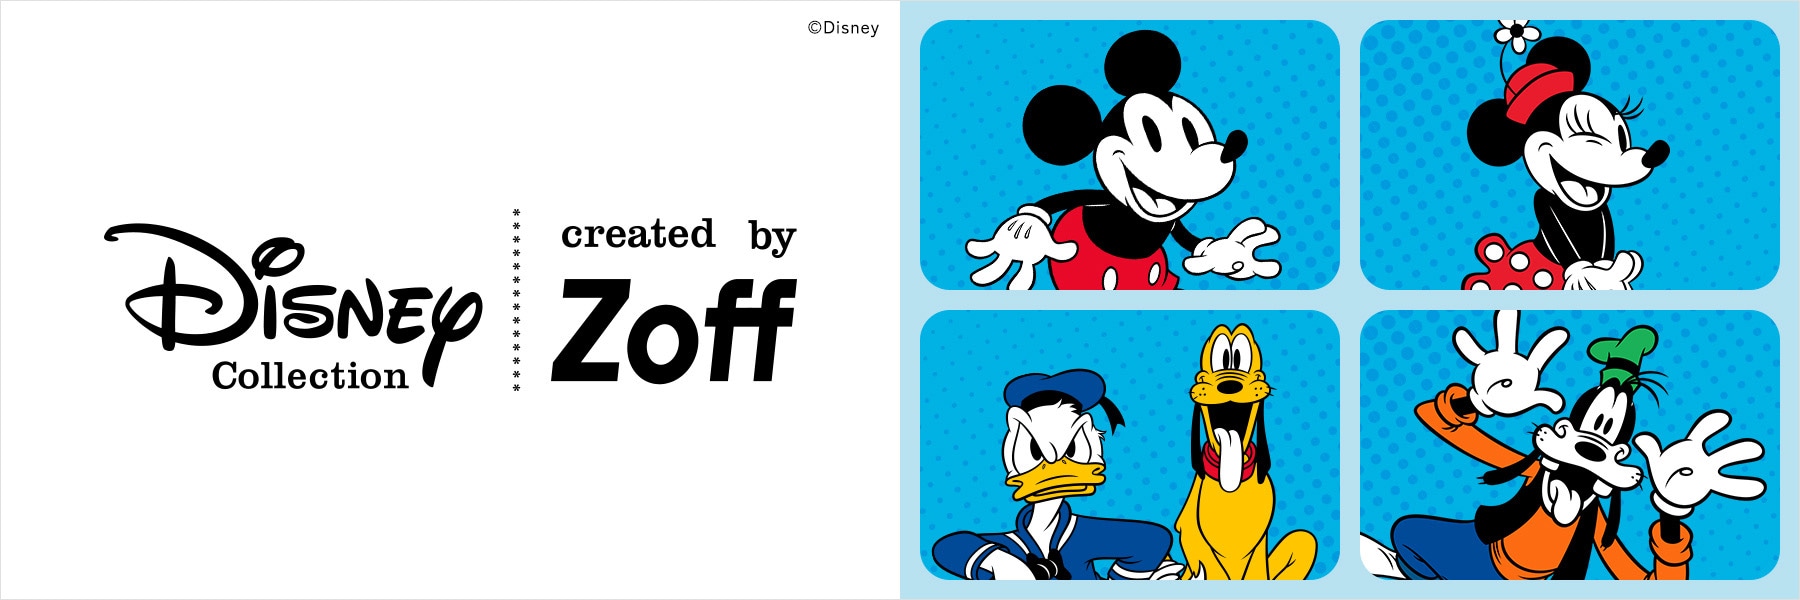 Disney Collection created by Zoff